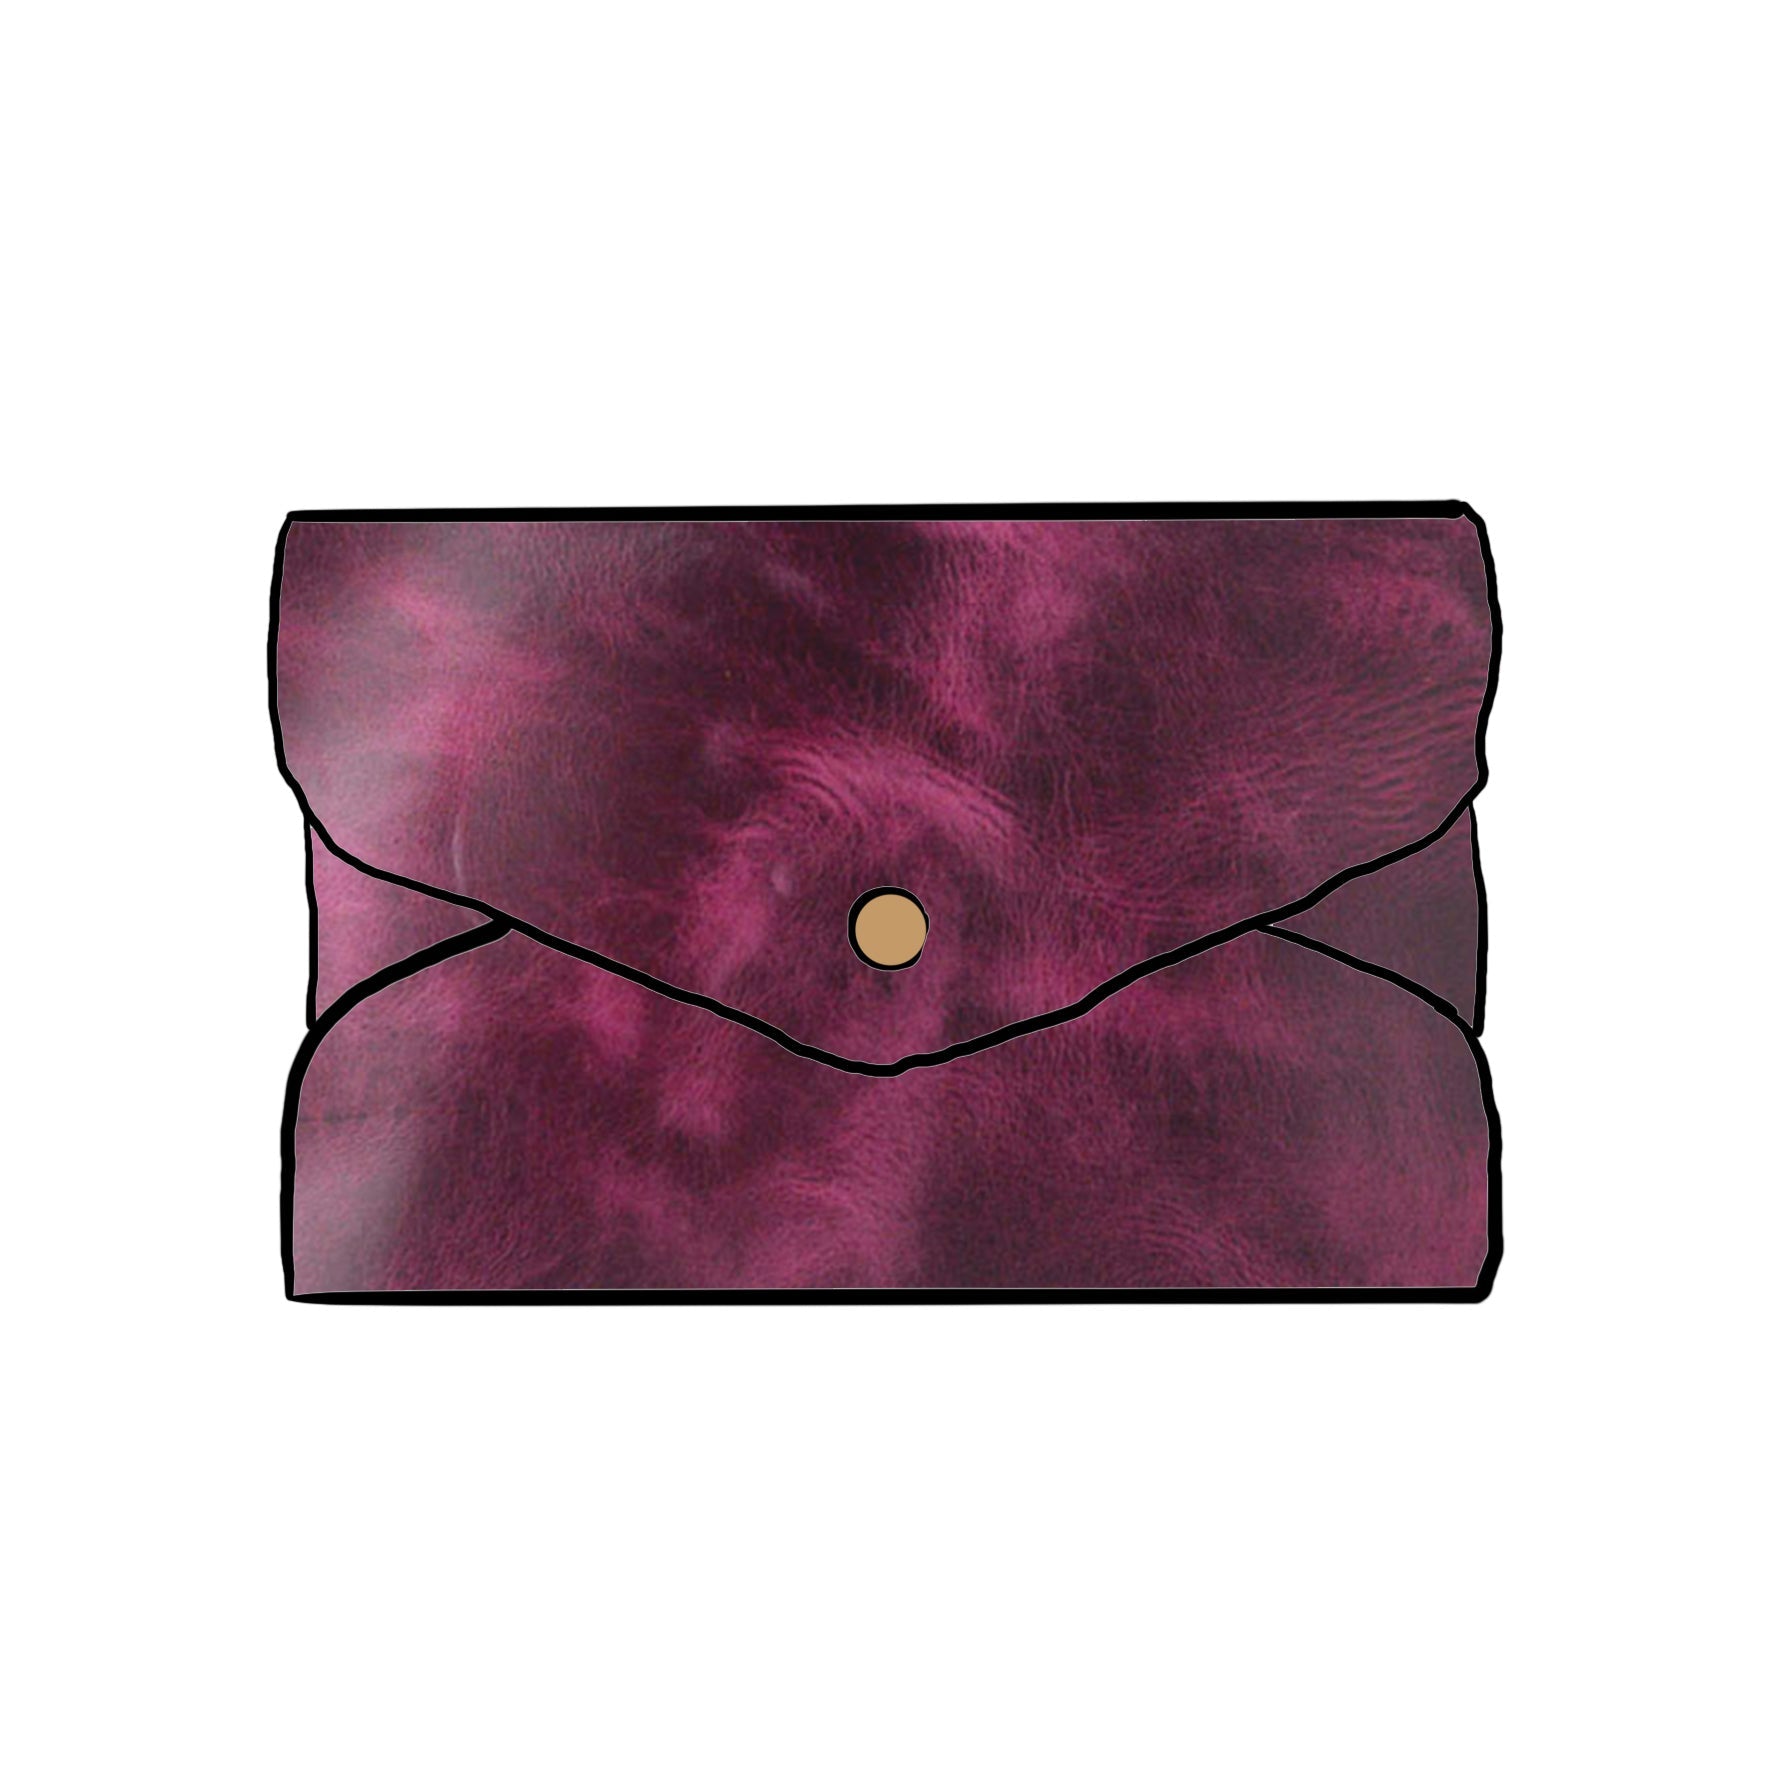 Purple Cheaha Envelope Clutch- leather clutch bag - handmade leather bags - KMM &amp; Co.